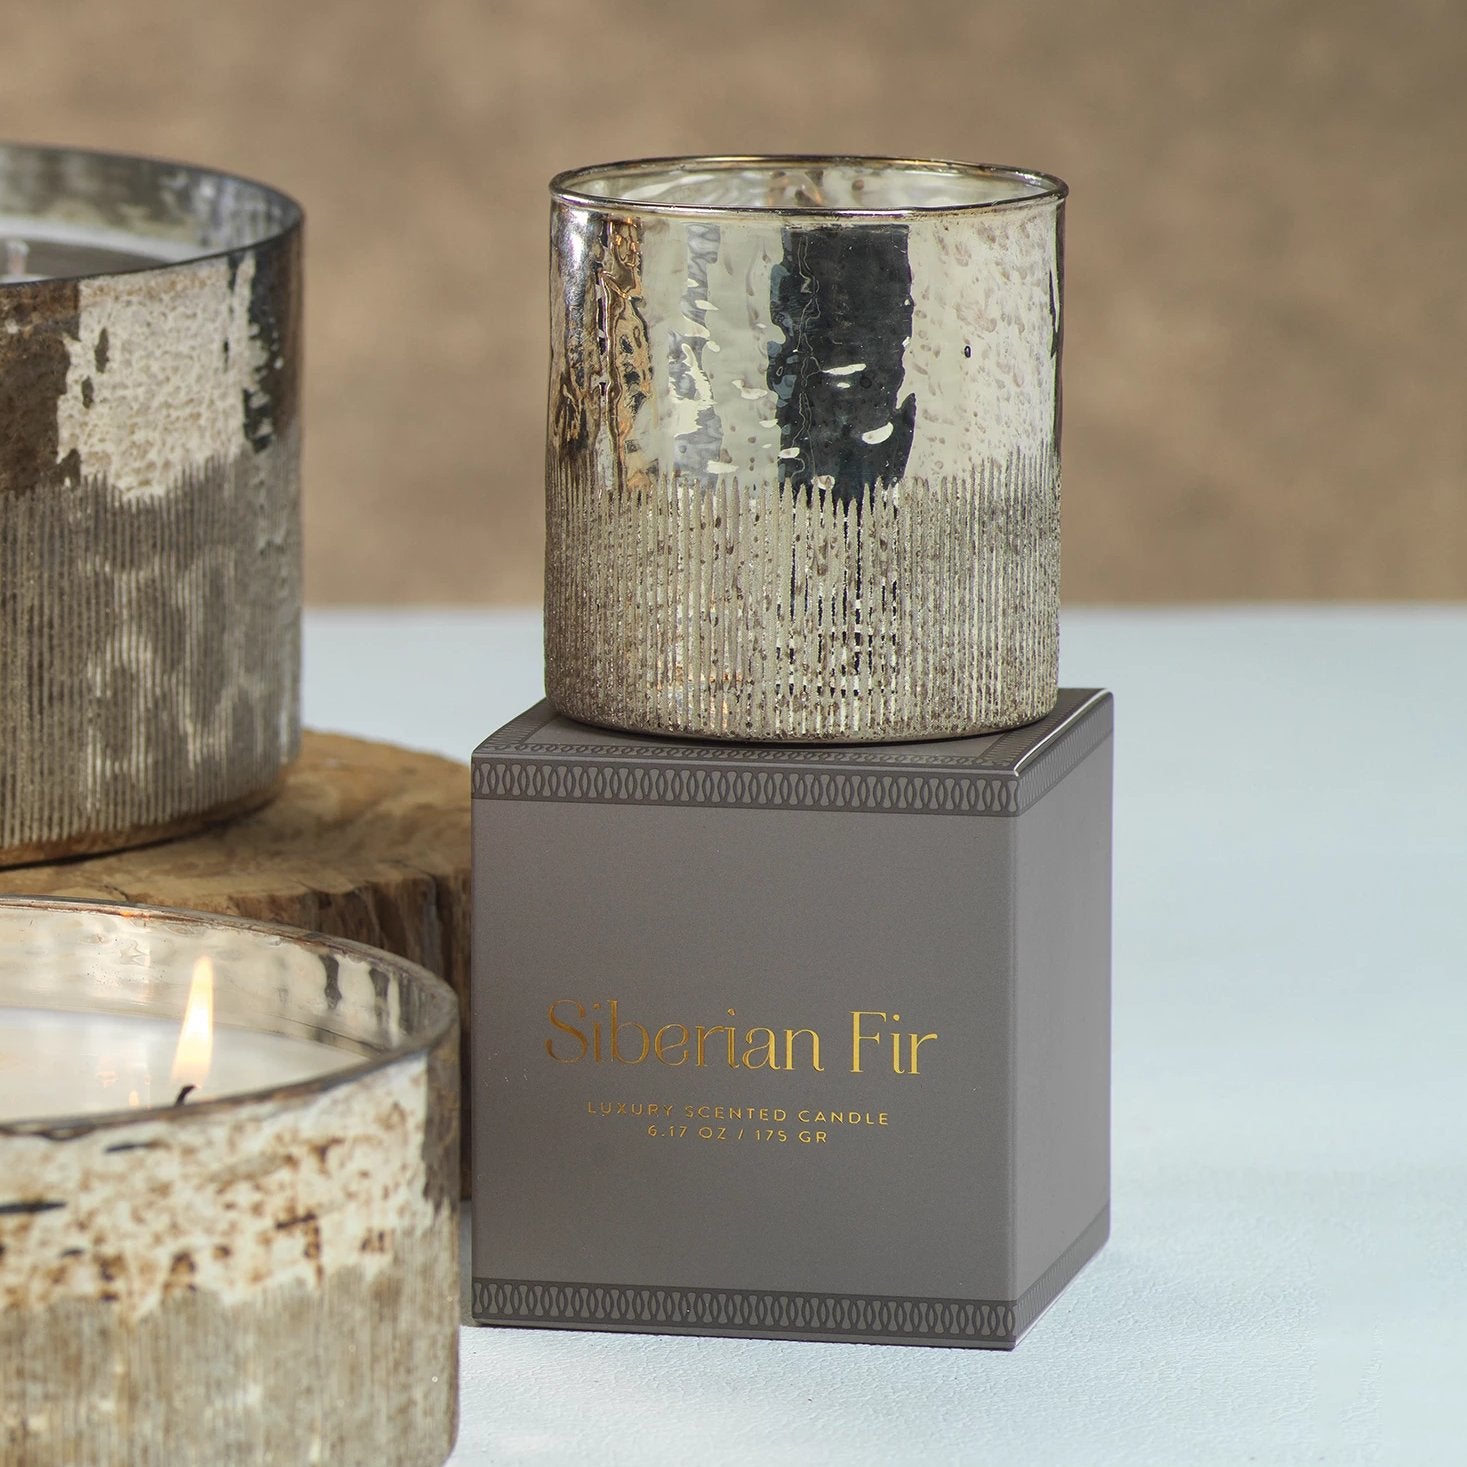 Siberian Fir Scented Antique Gold Candle w/ Gift Box - CARLYLE AVENUE